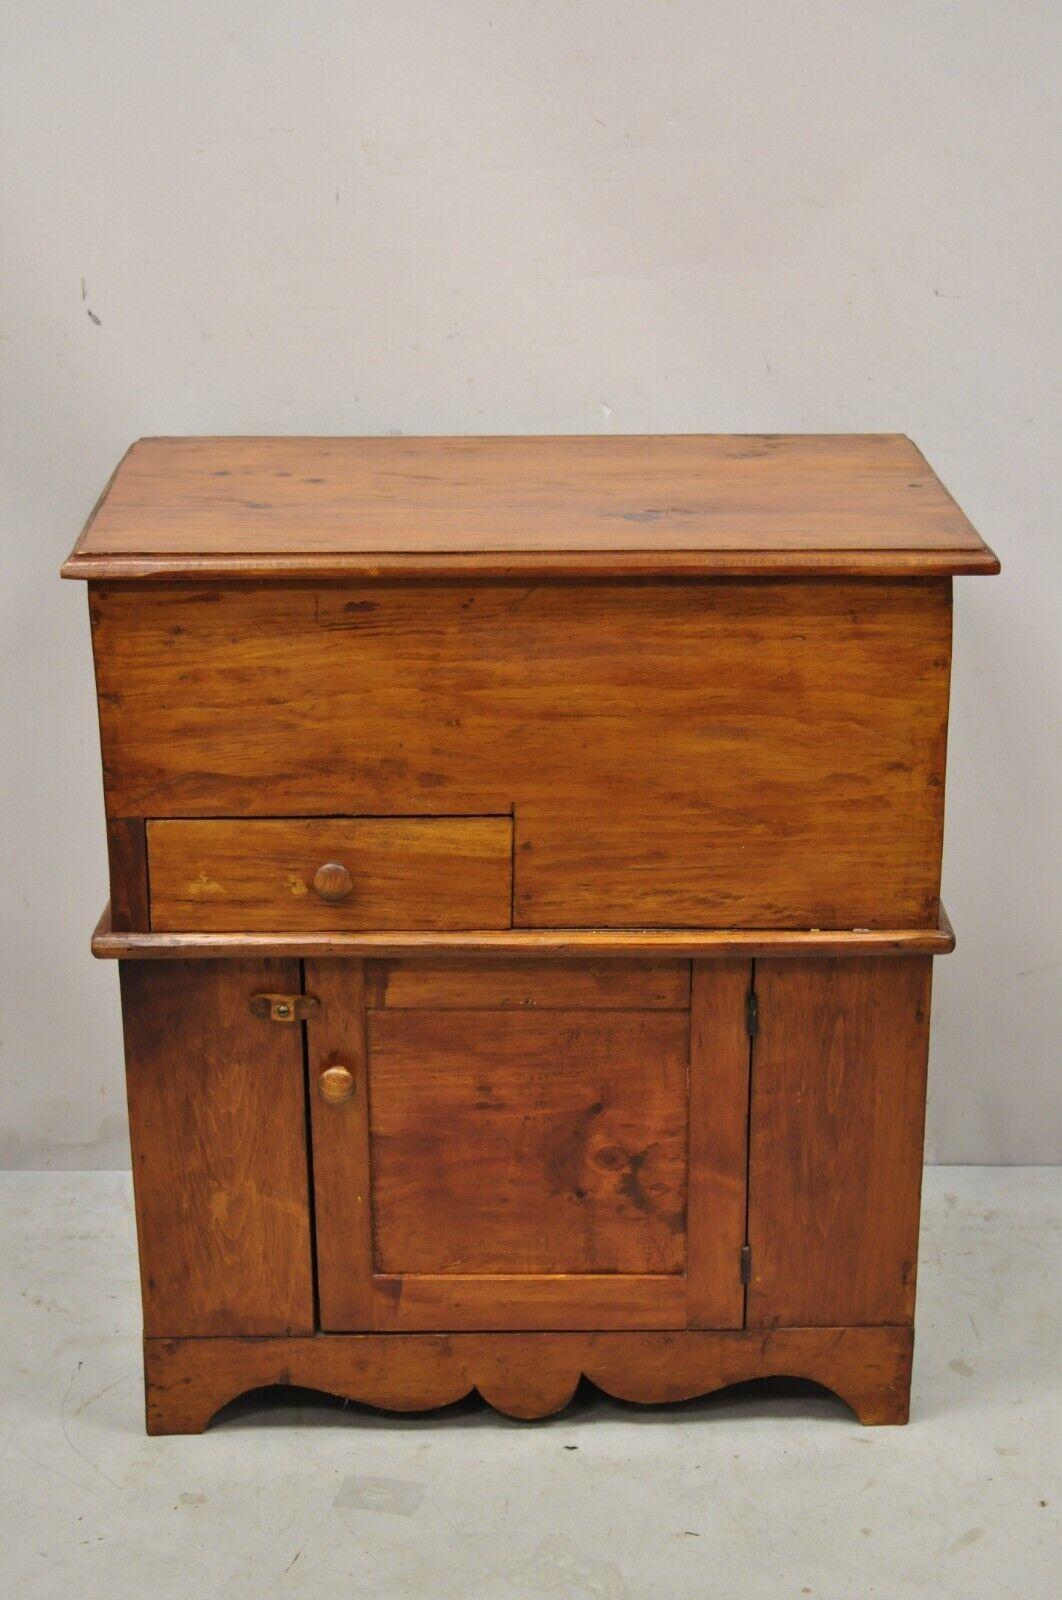 Antique Flip Top Primitive Colonial Pine Wood Washstand Commode. Item featured is a flip top, beautiful wood grain, 1 swing door, very nice antique item, quality American craftsmanship, Possibly refinished at some point over the years. Circa 19th